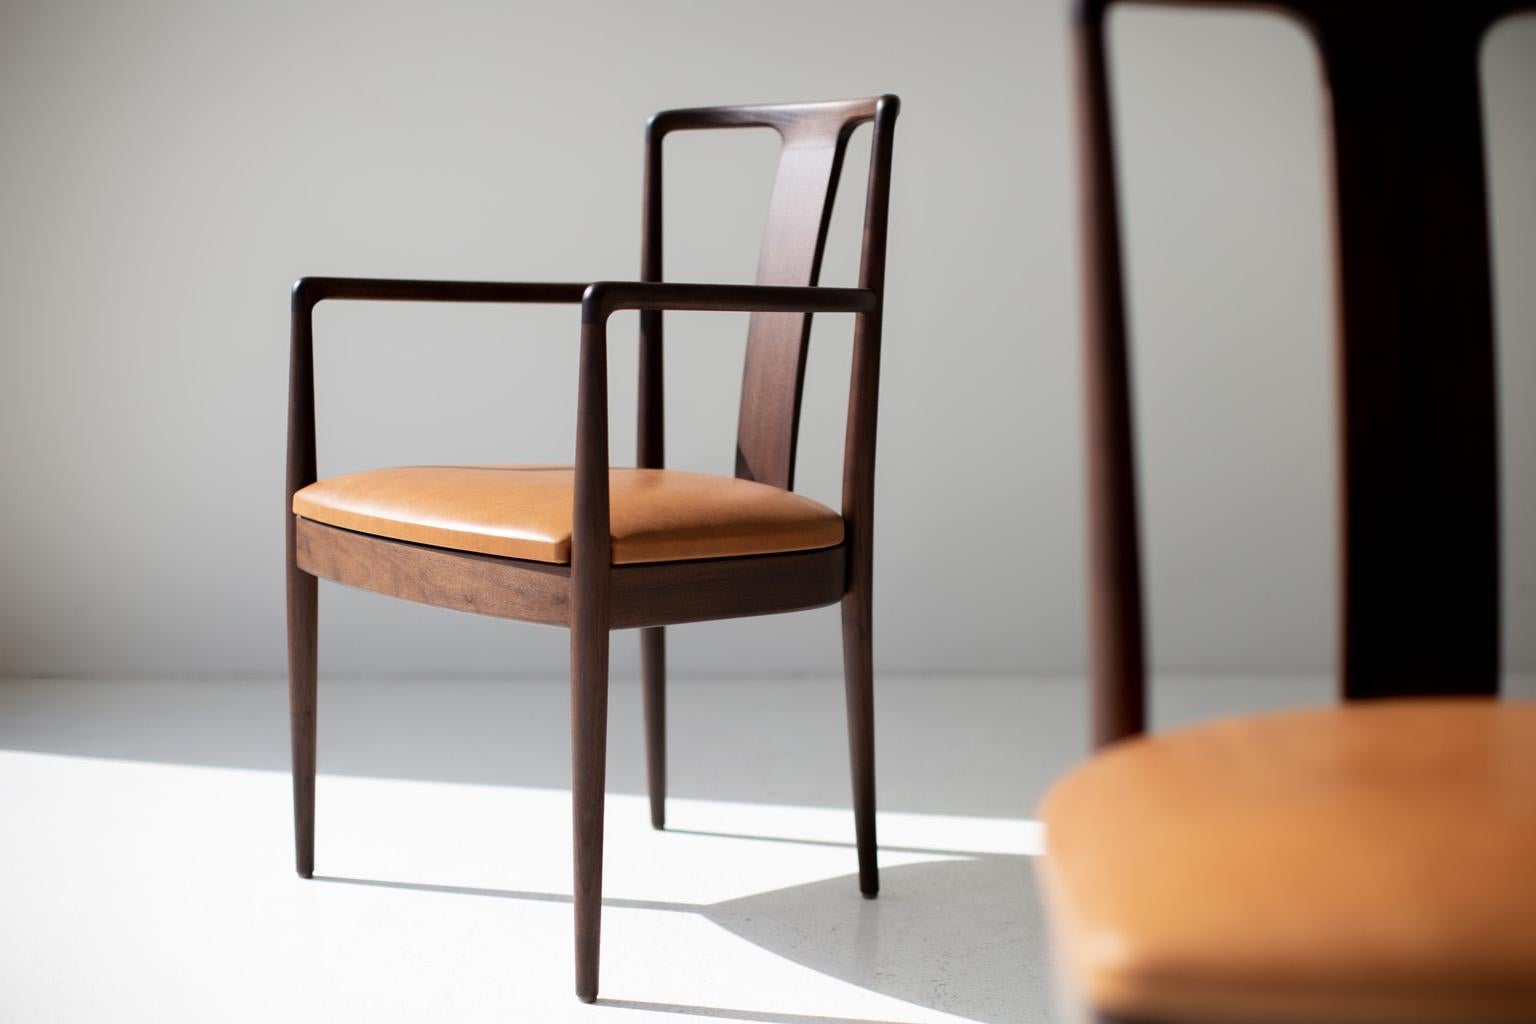 Derby Dining Chairs, Modern Dining Arm Chair, Peabody, Walnut, Leather, Craft Associates

These modern wood dining arm chair by Lawrence Peabody : The Derby Chair for Craft Associates Furniture are expertly hand crafted and upholstered. These